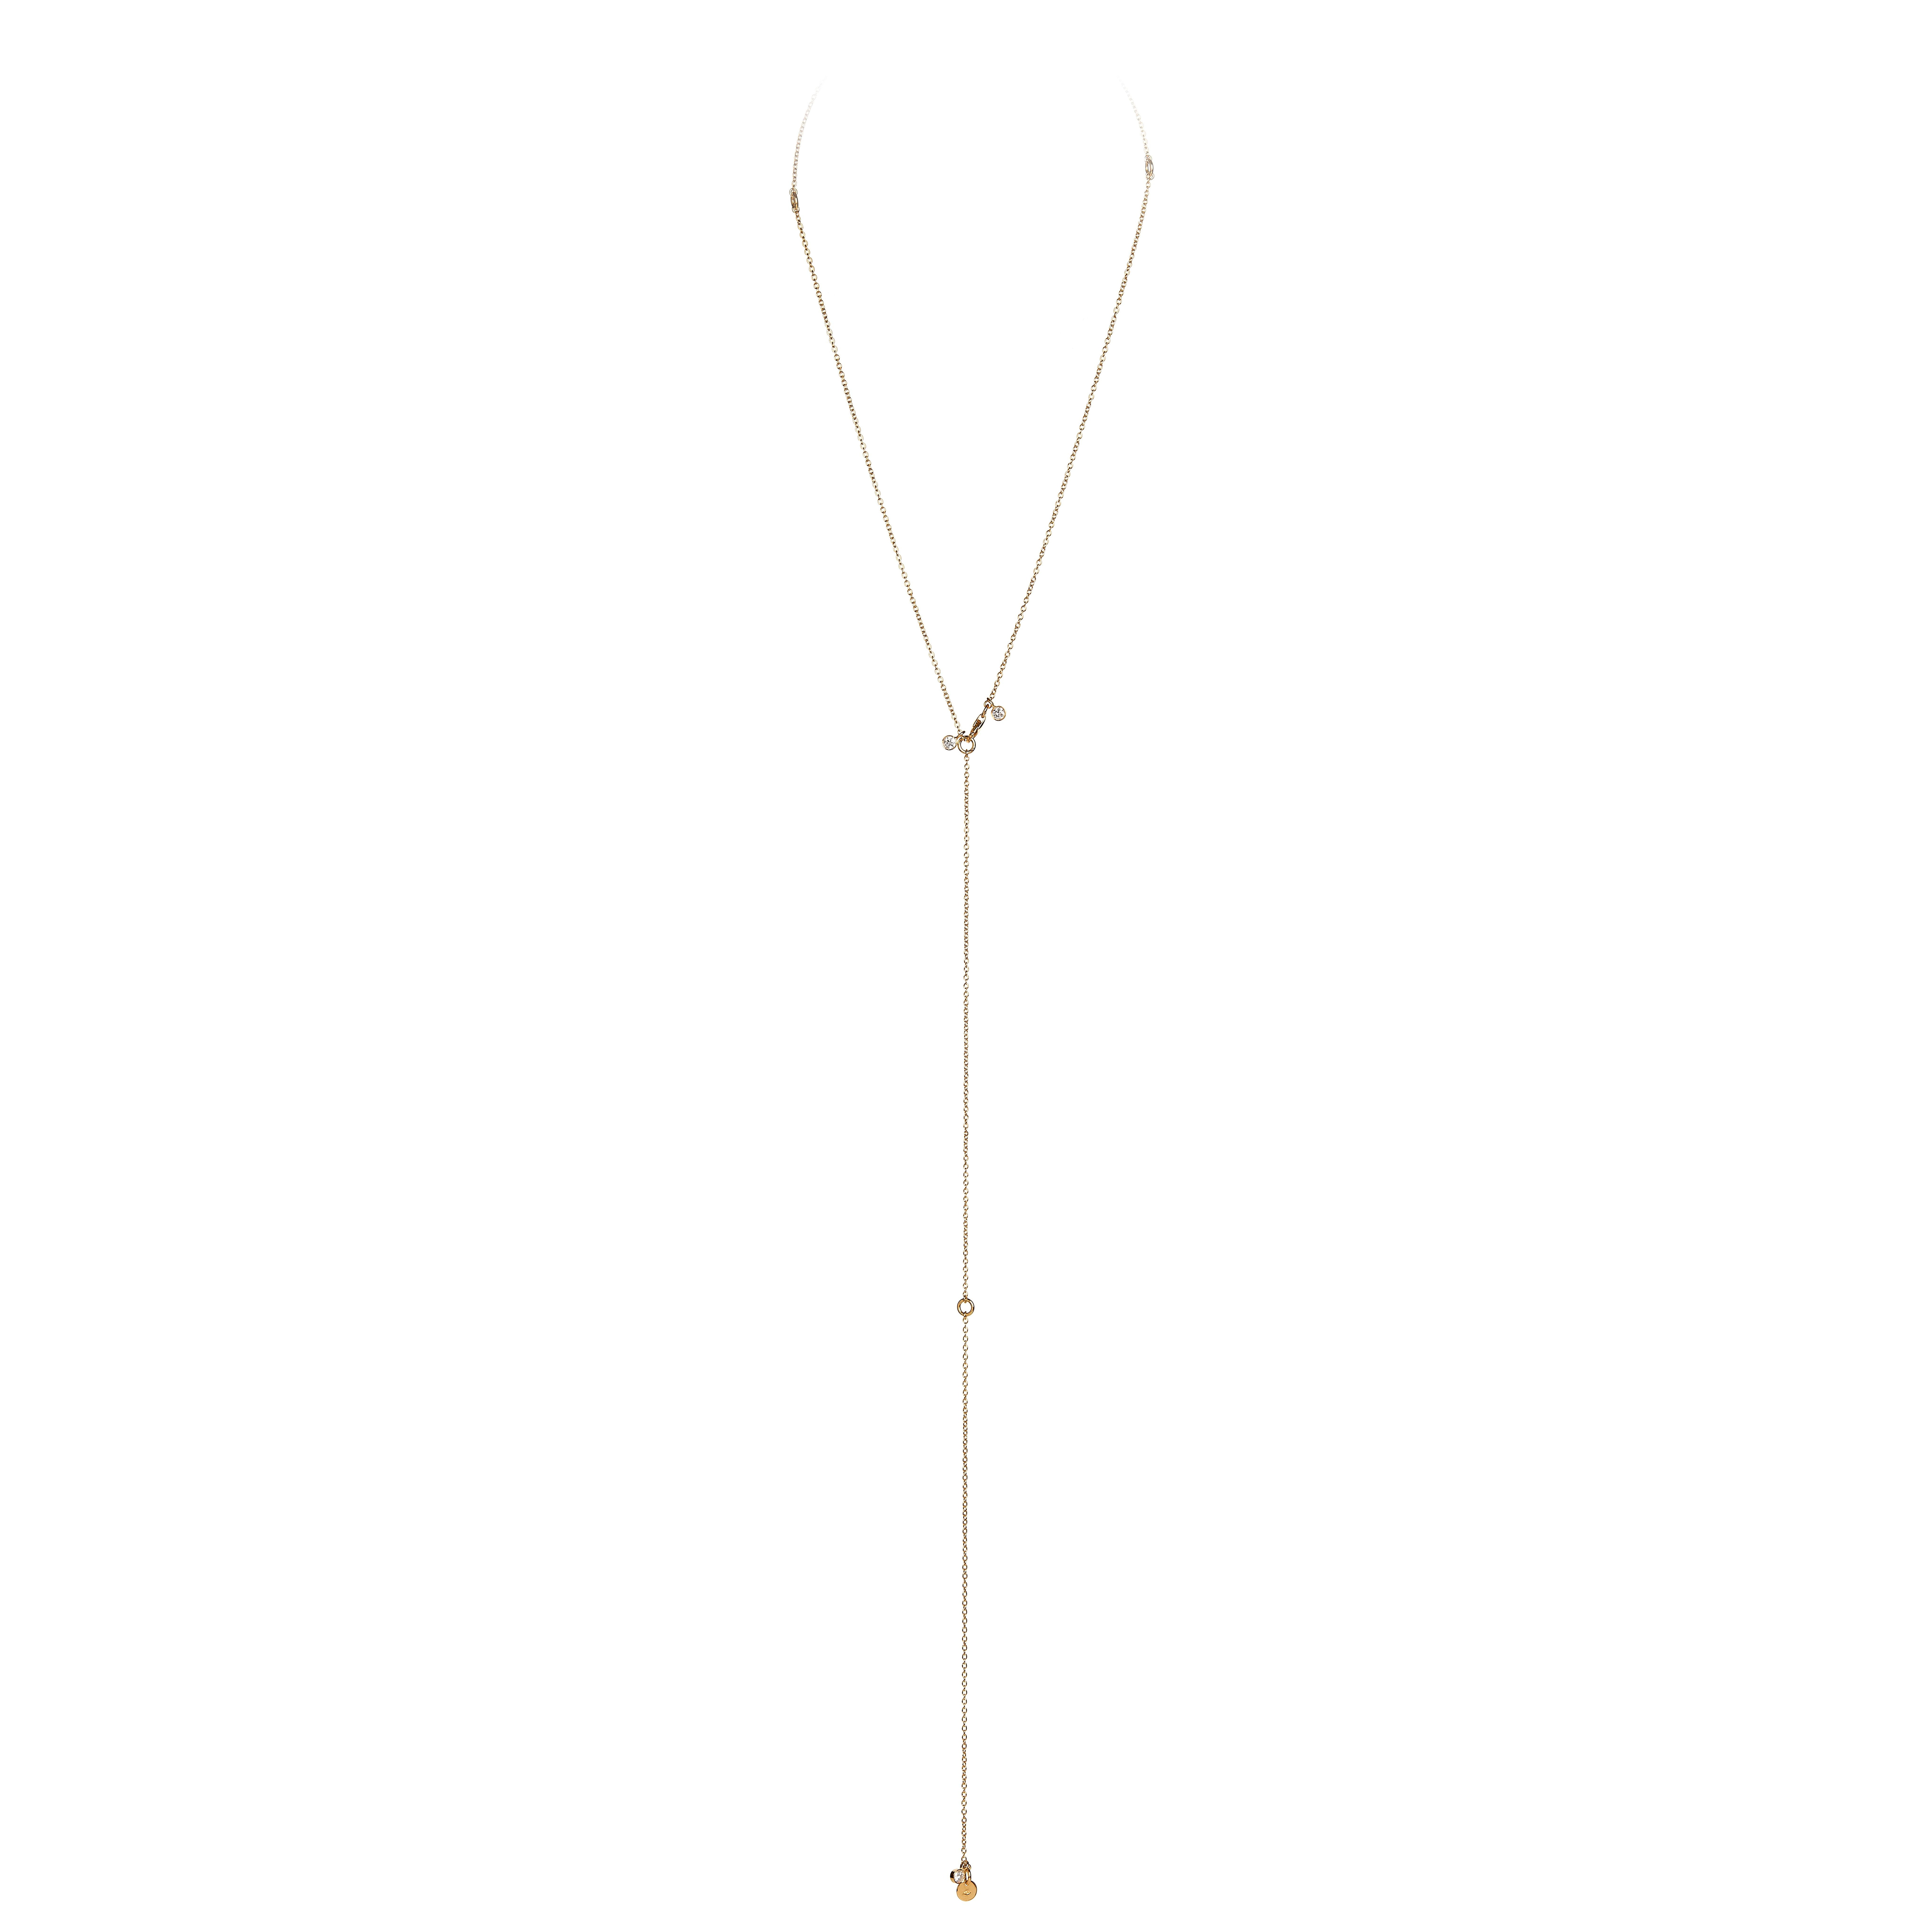 Nathalie Jean Contemporary 0.33 Carat Diamond Gold Pendant Chain Necklace In New Condition For Sale In Milan, Lombardia